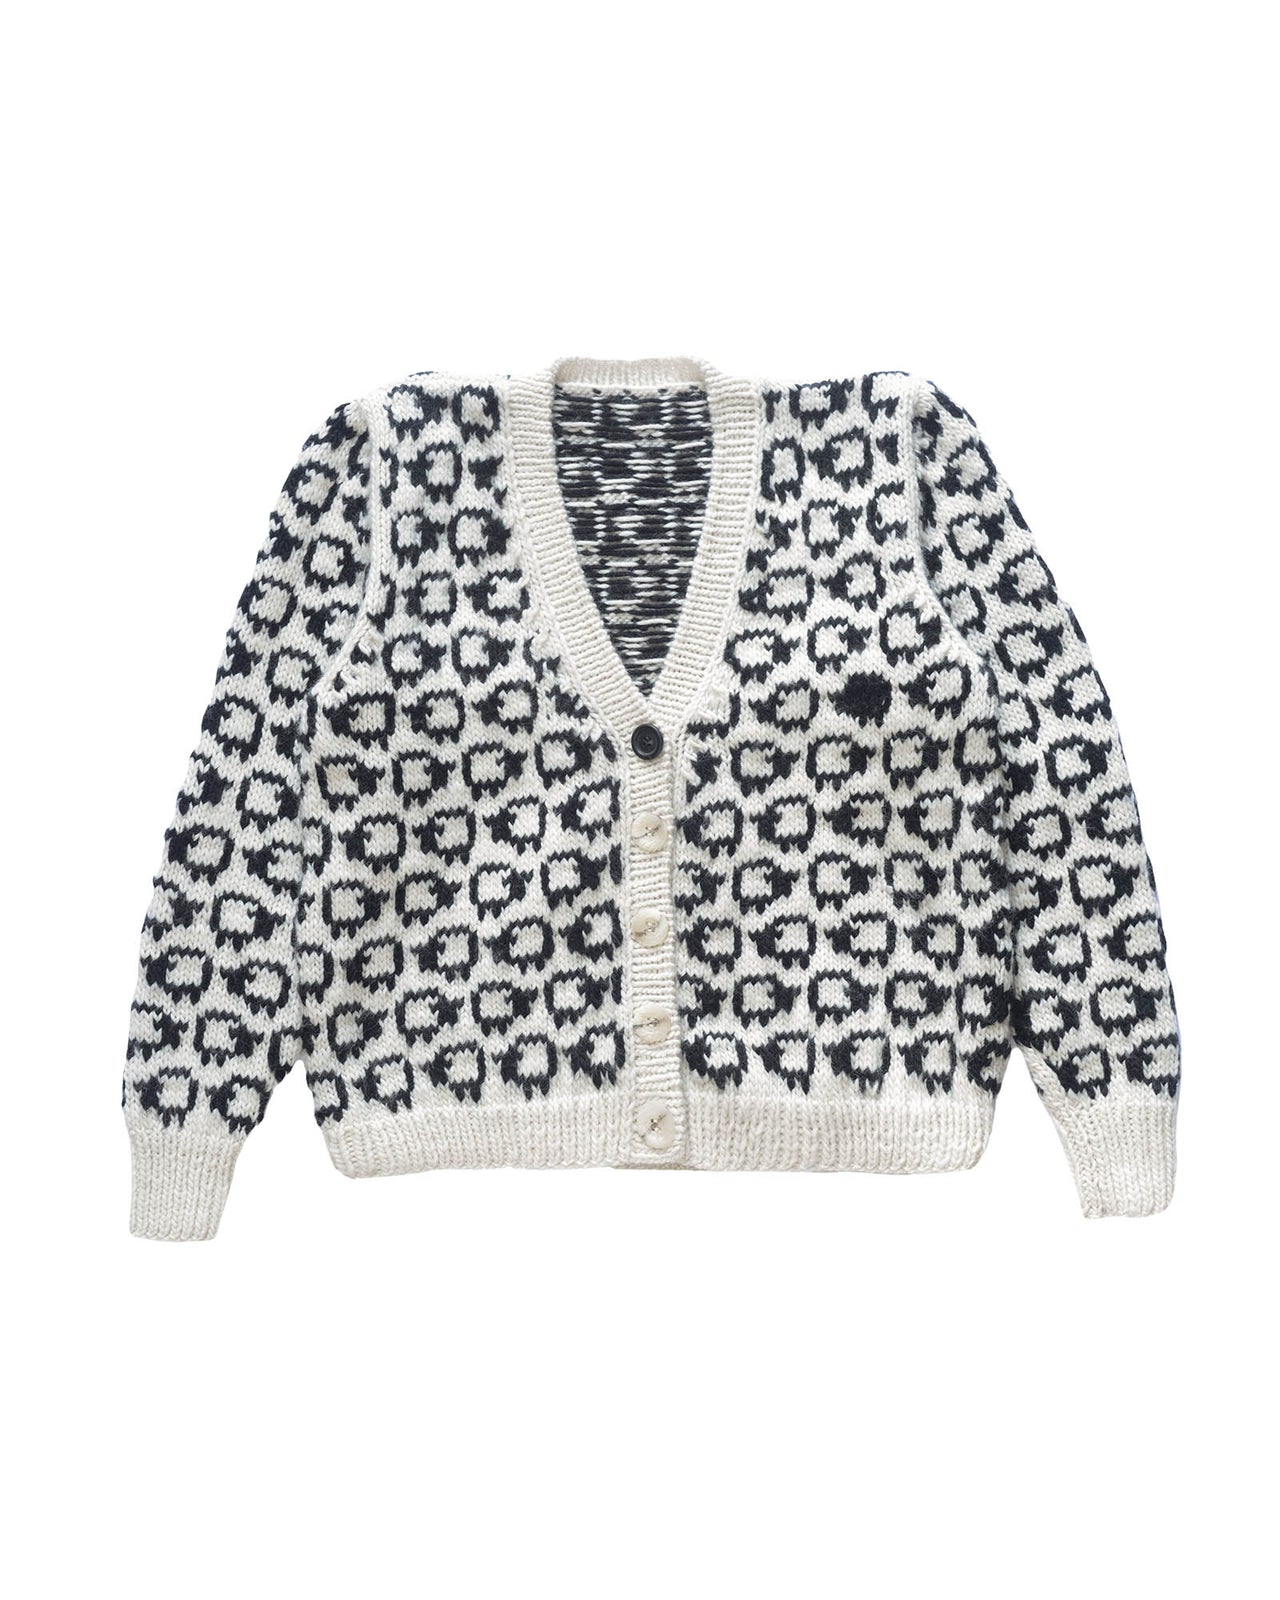 Wool cardigan laid flat on white background. The cardigan has a herd of white sheep all over with a single black sheep on the left side.  